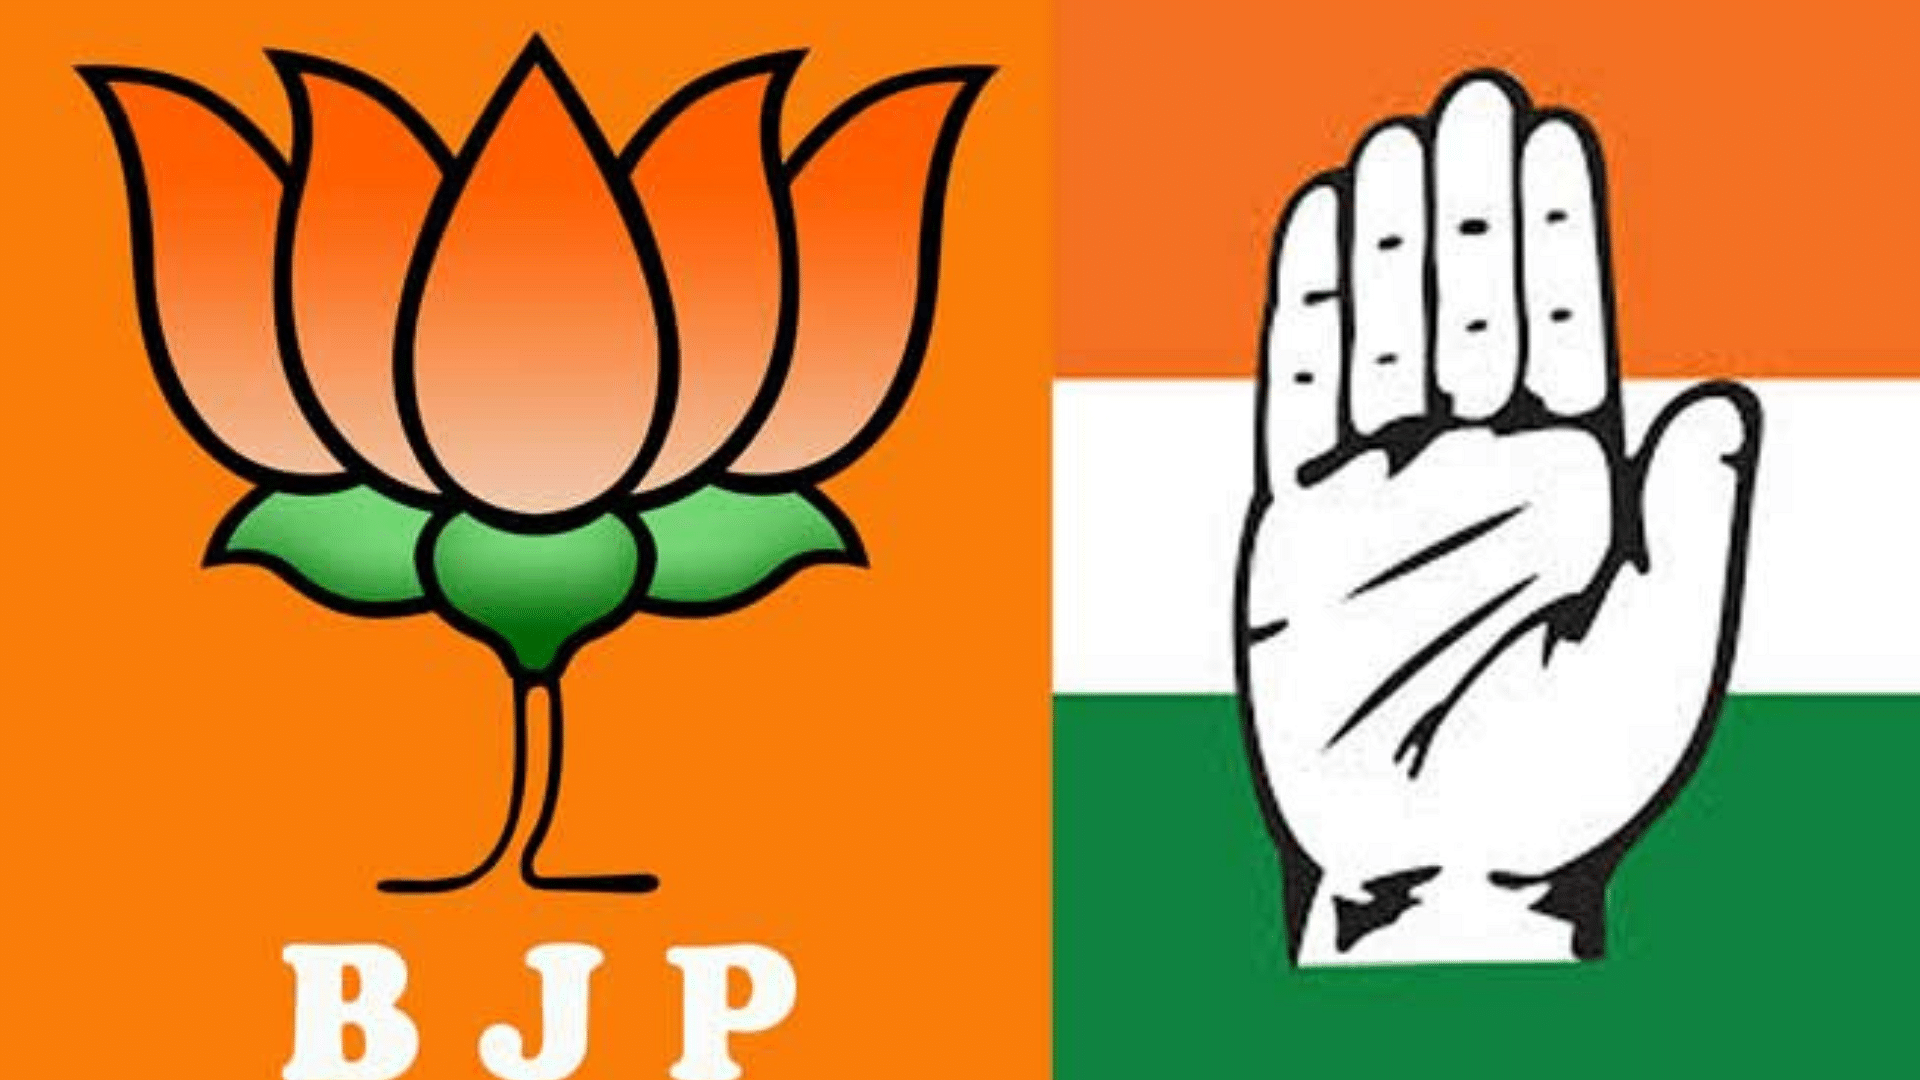 <div class="paragraphs"><p>BJP&nbsp;on Tuesday, 16 August, launched a social media campaign "<em>Desh ki badli soch</em>" targeting Congress leaders who have previously served as the Prime Minister of India.</p></div>